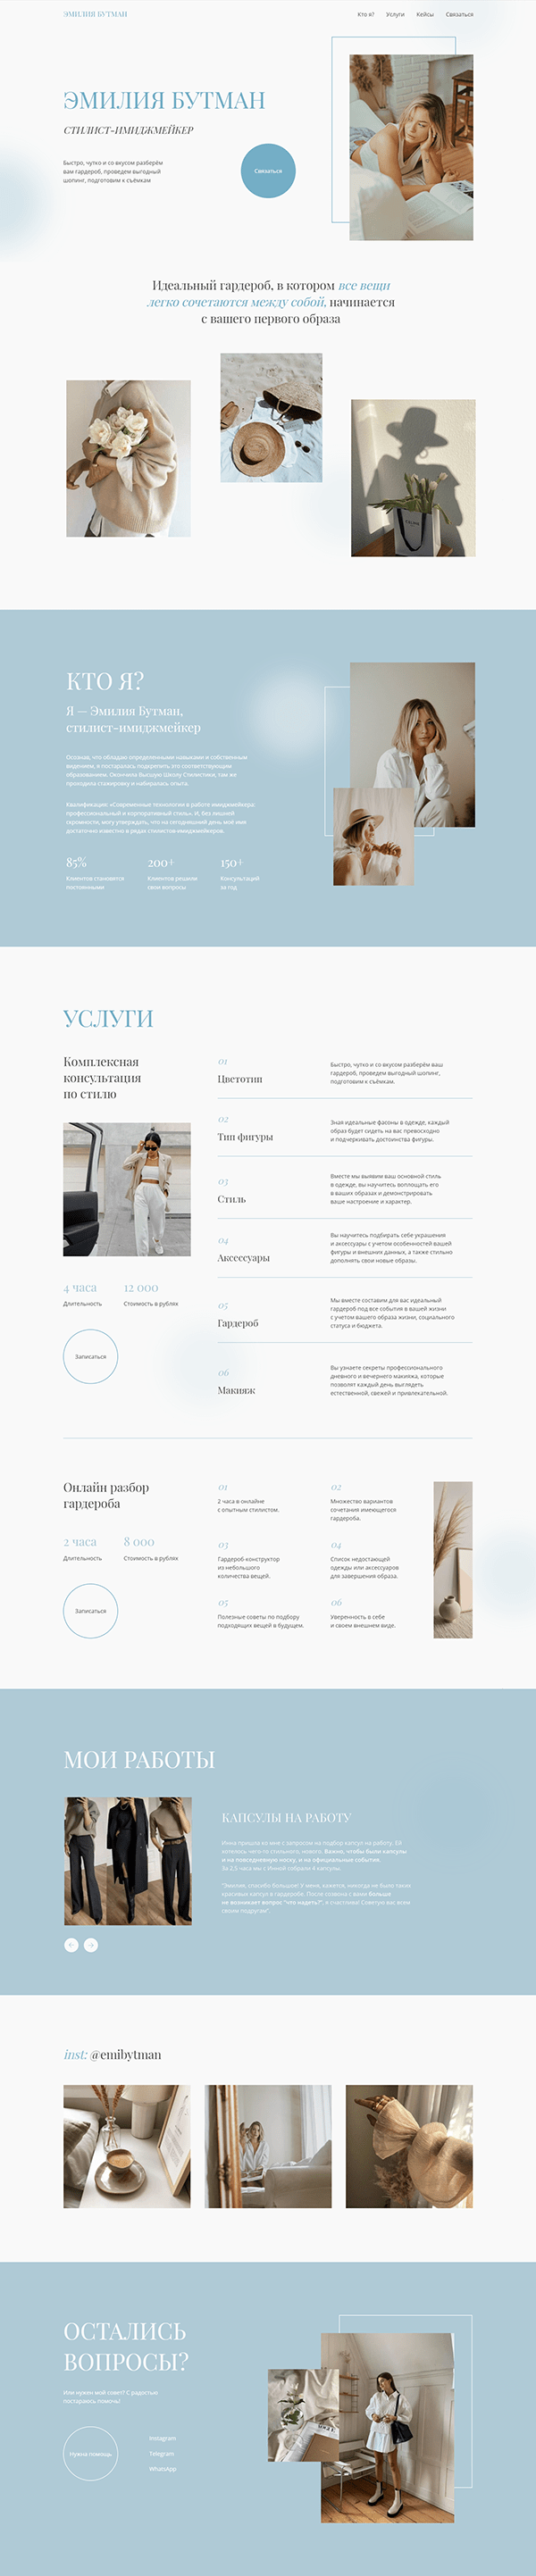 Landing page for stylist